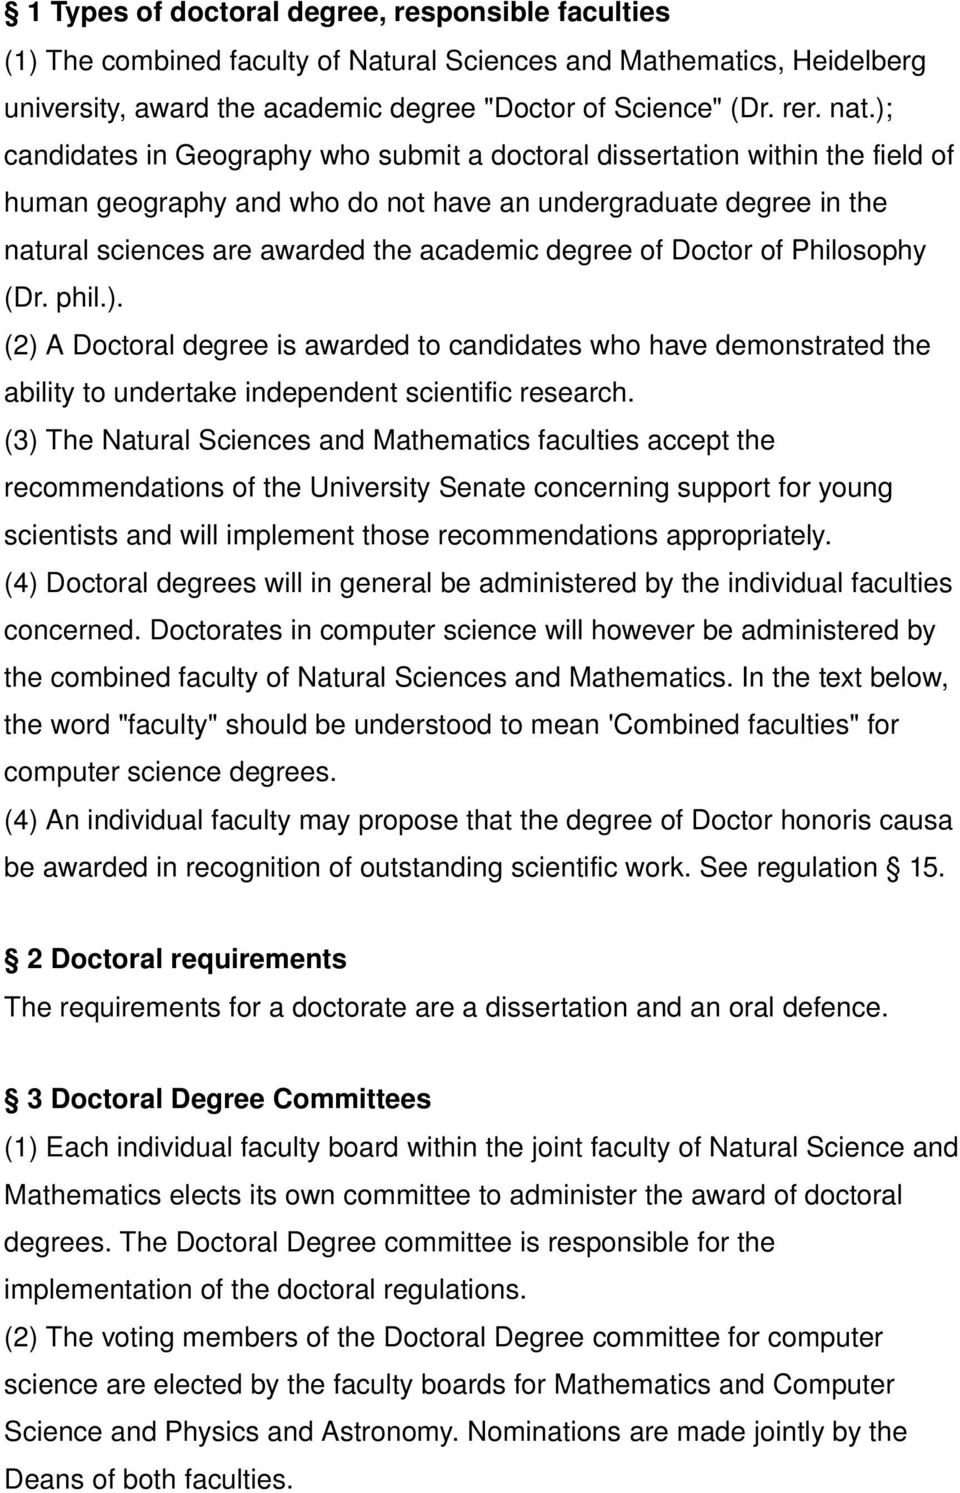 of Doctor of Philosophy (Dr. phil.). (2) A Doctoral degree is awarded to candidates who have demonstrated the ability to undertake independent scientific research.